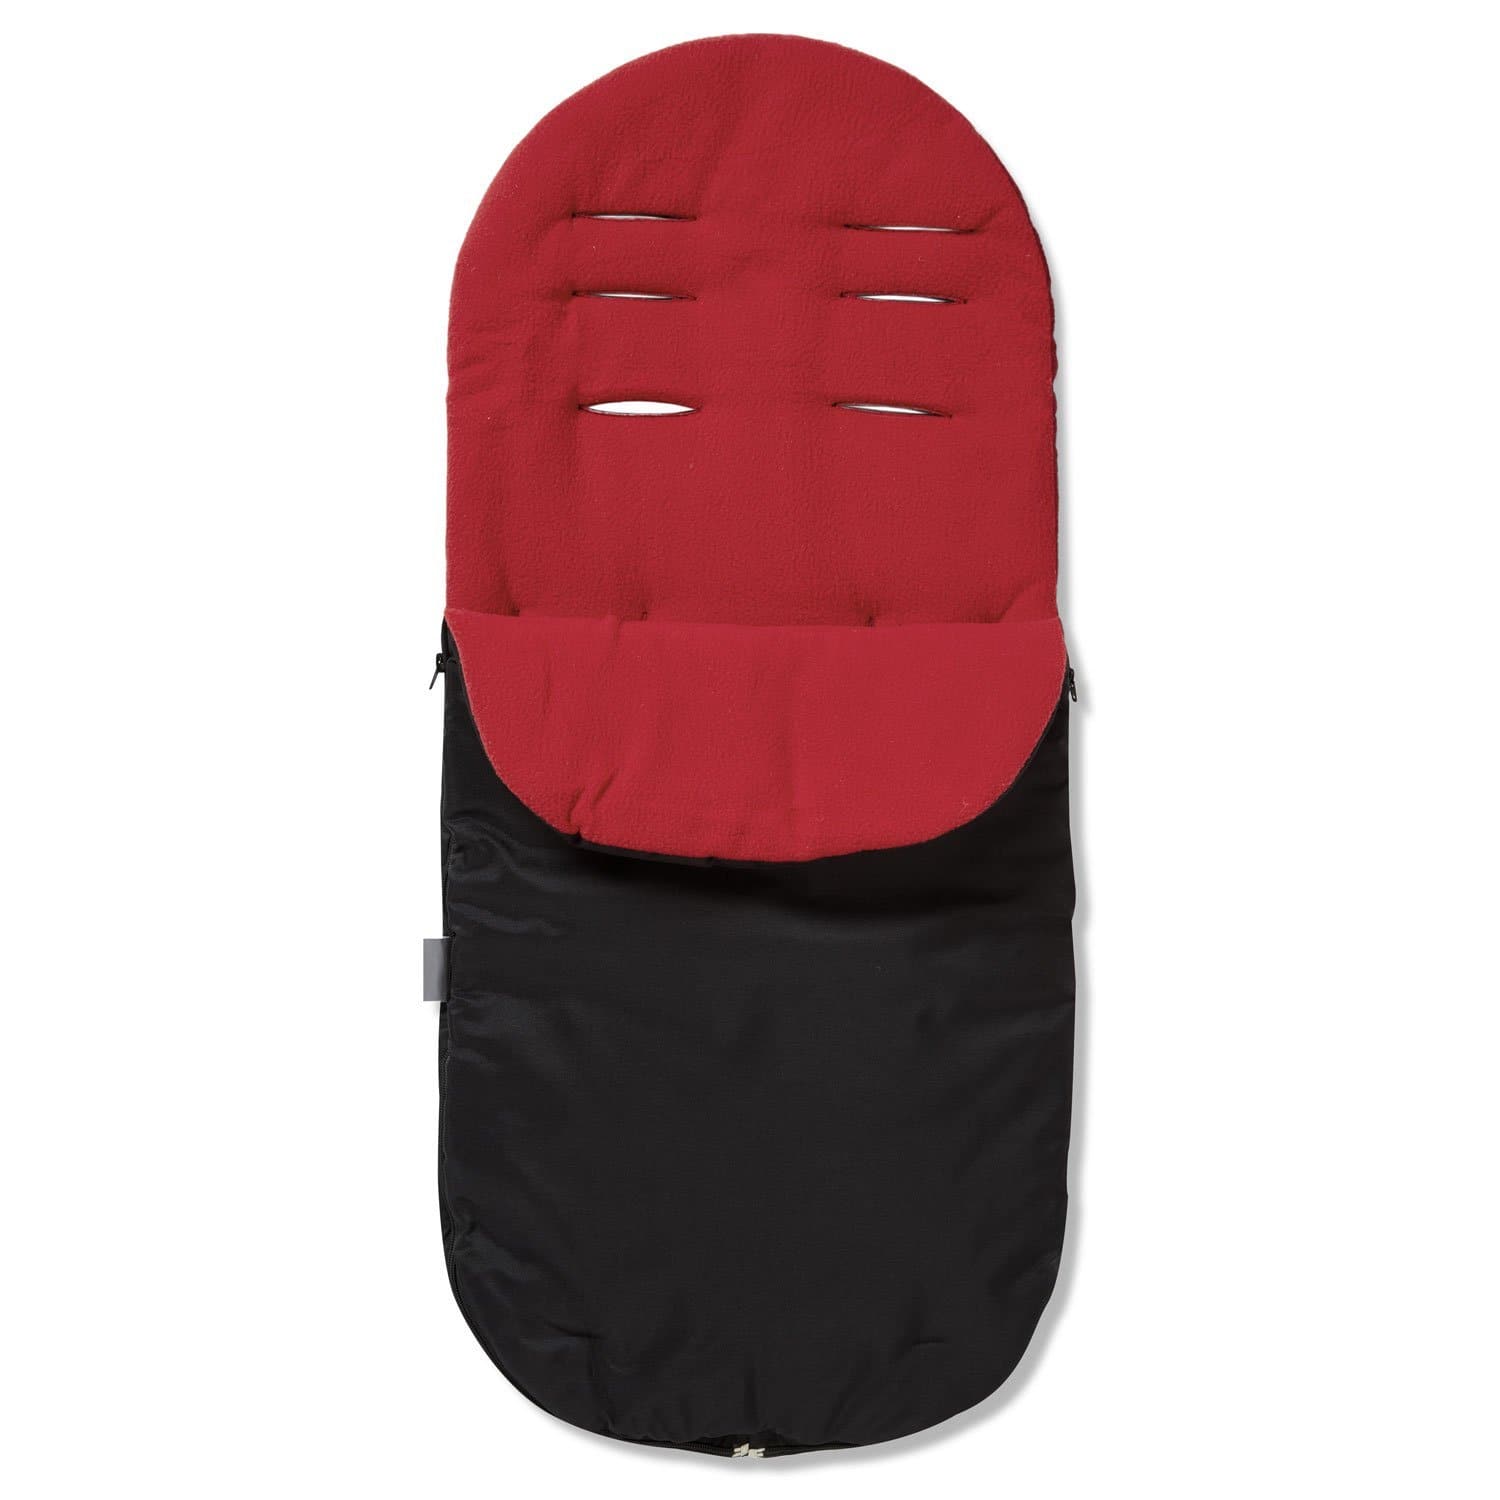 Footmuff / Cosy Toes Compatible with Bumbleride - Red / Fits All Models | For Your Little One